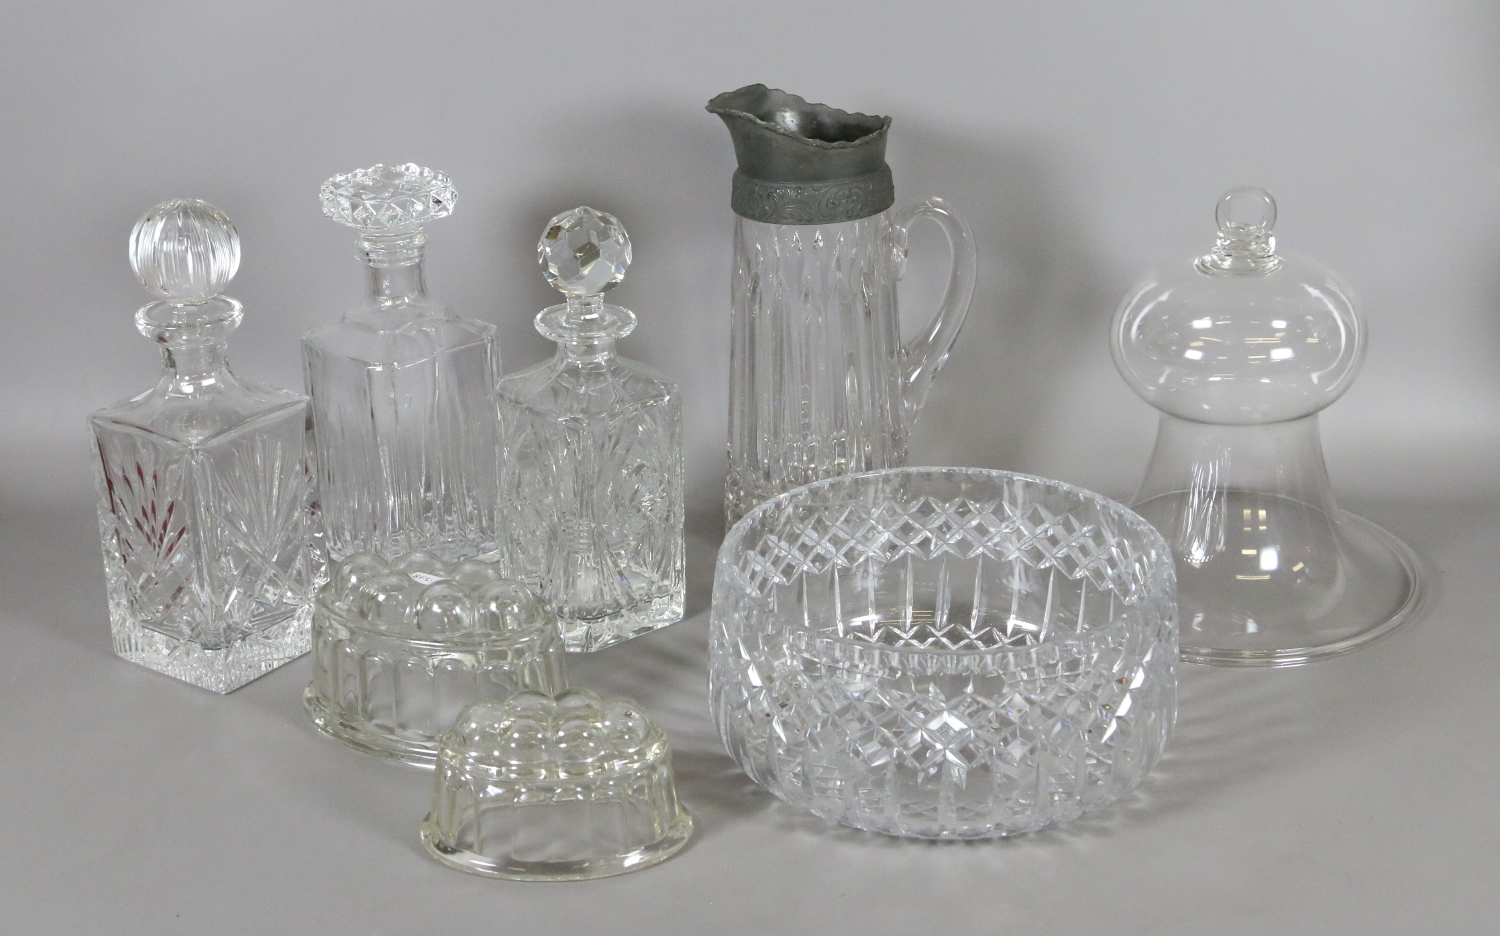 A collection of cut glass items including decanters, a jug and a glass smoke bell.